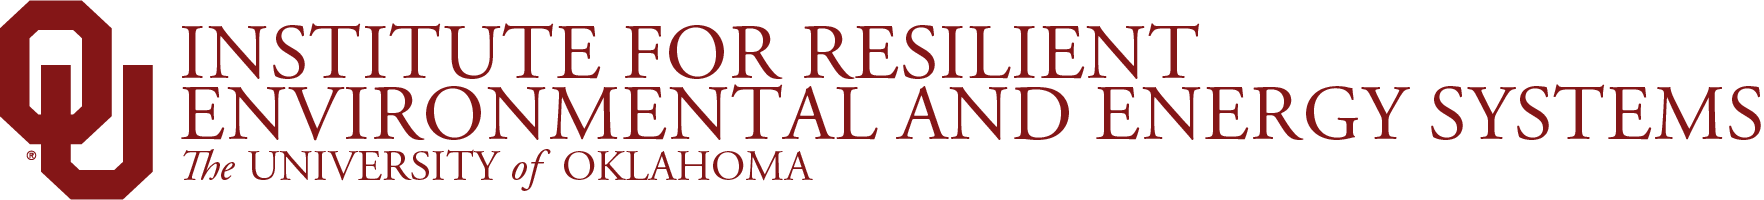 OU Institute for Resilient Environmental and Energy Systems, The University of Oklahoma website wordmark